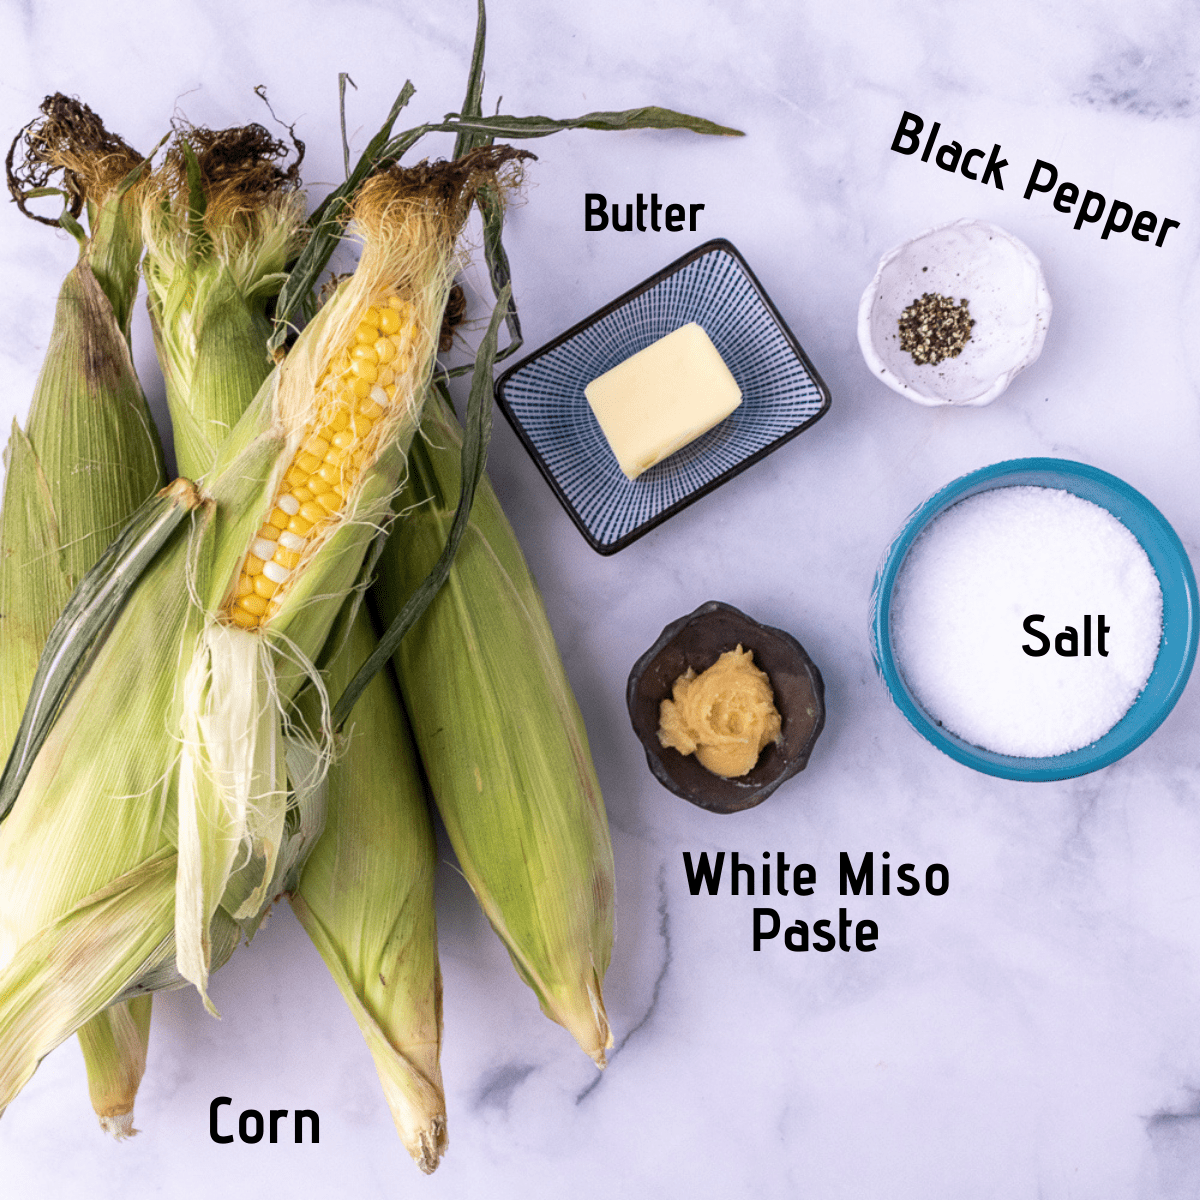 Raw ingredients laid out and labeled on a white marble background, fresh corn, butter, black pepper, salt and white miso paste